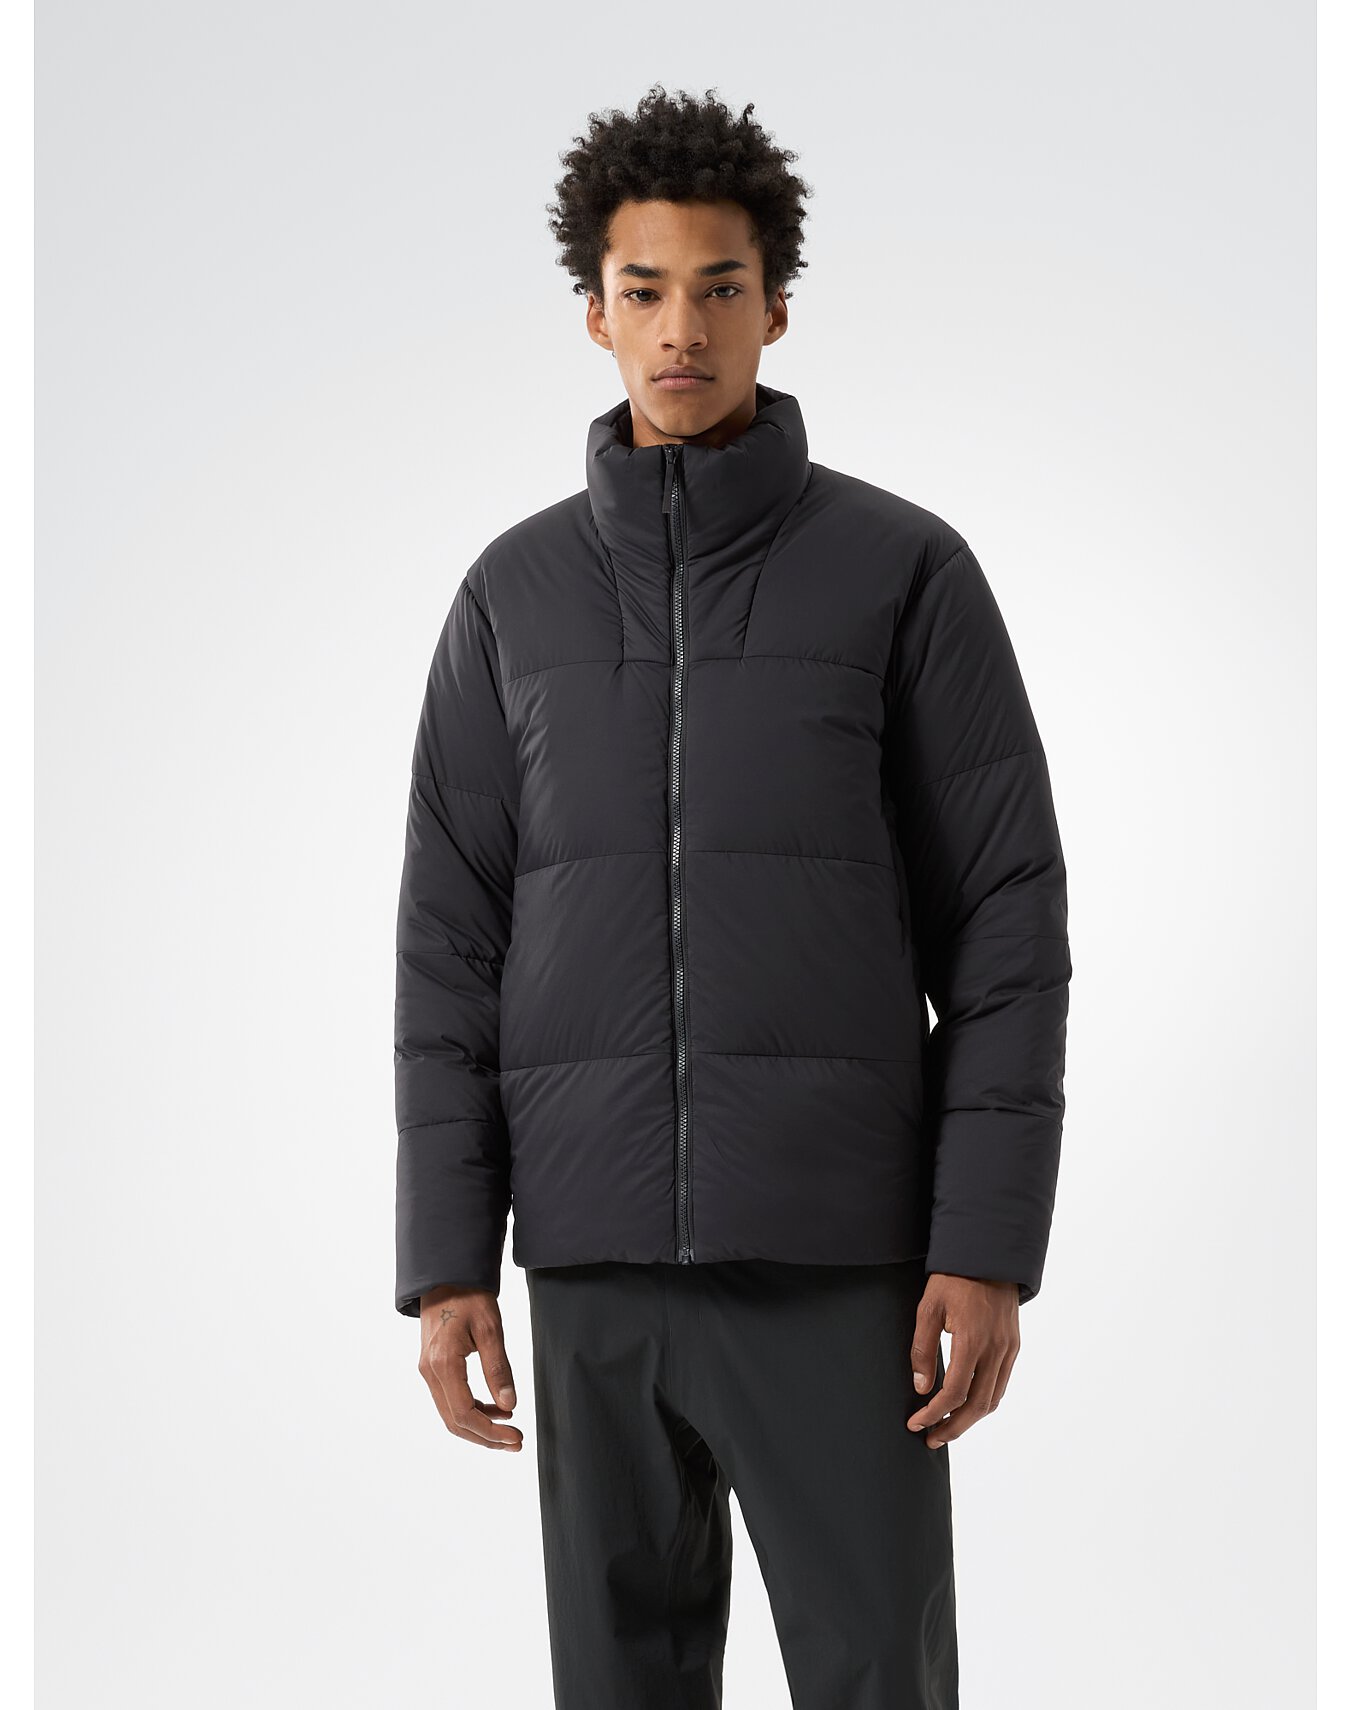 Arc'teryx Veilance Clothing & Accessories - Insulated Jackets 